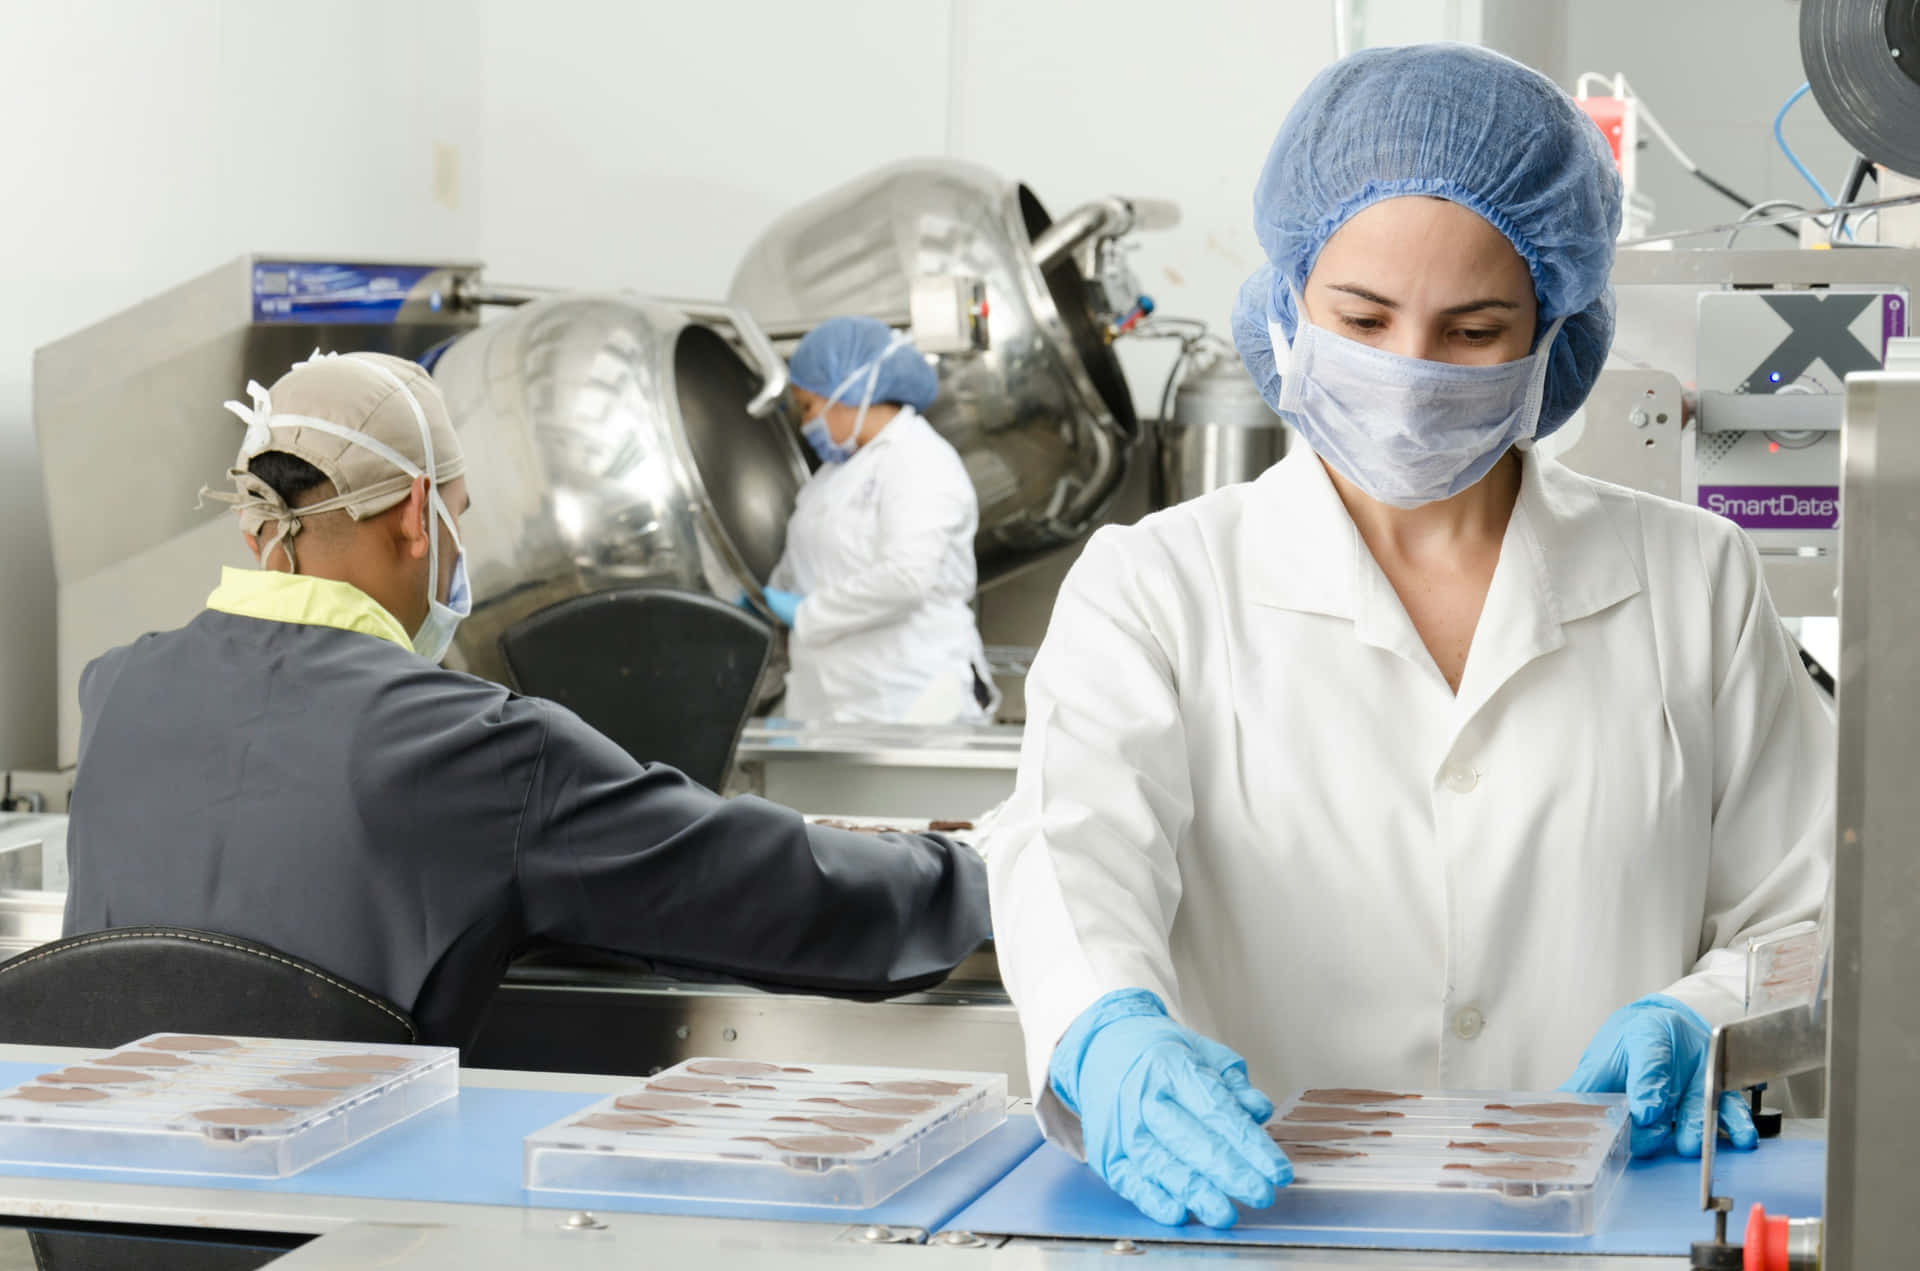 Pharmaceutical Production Line Workers.jpg Wallpaper